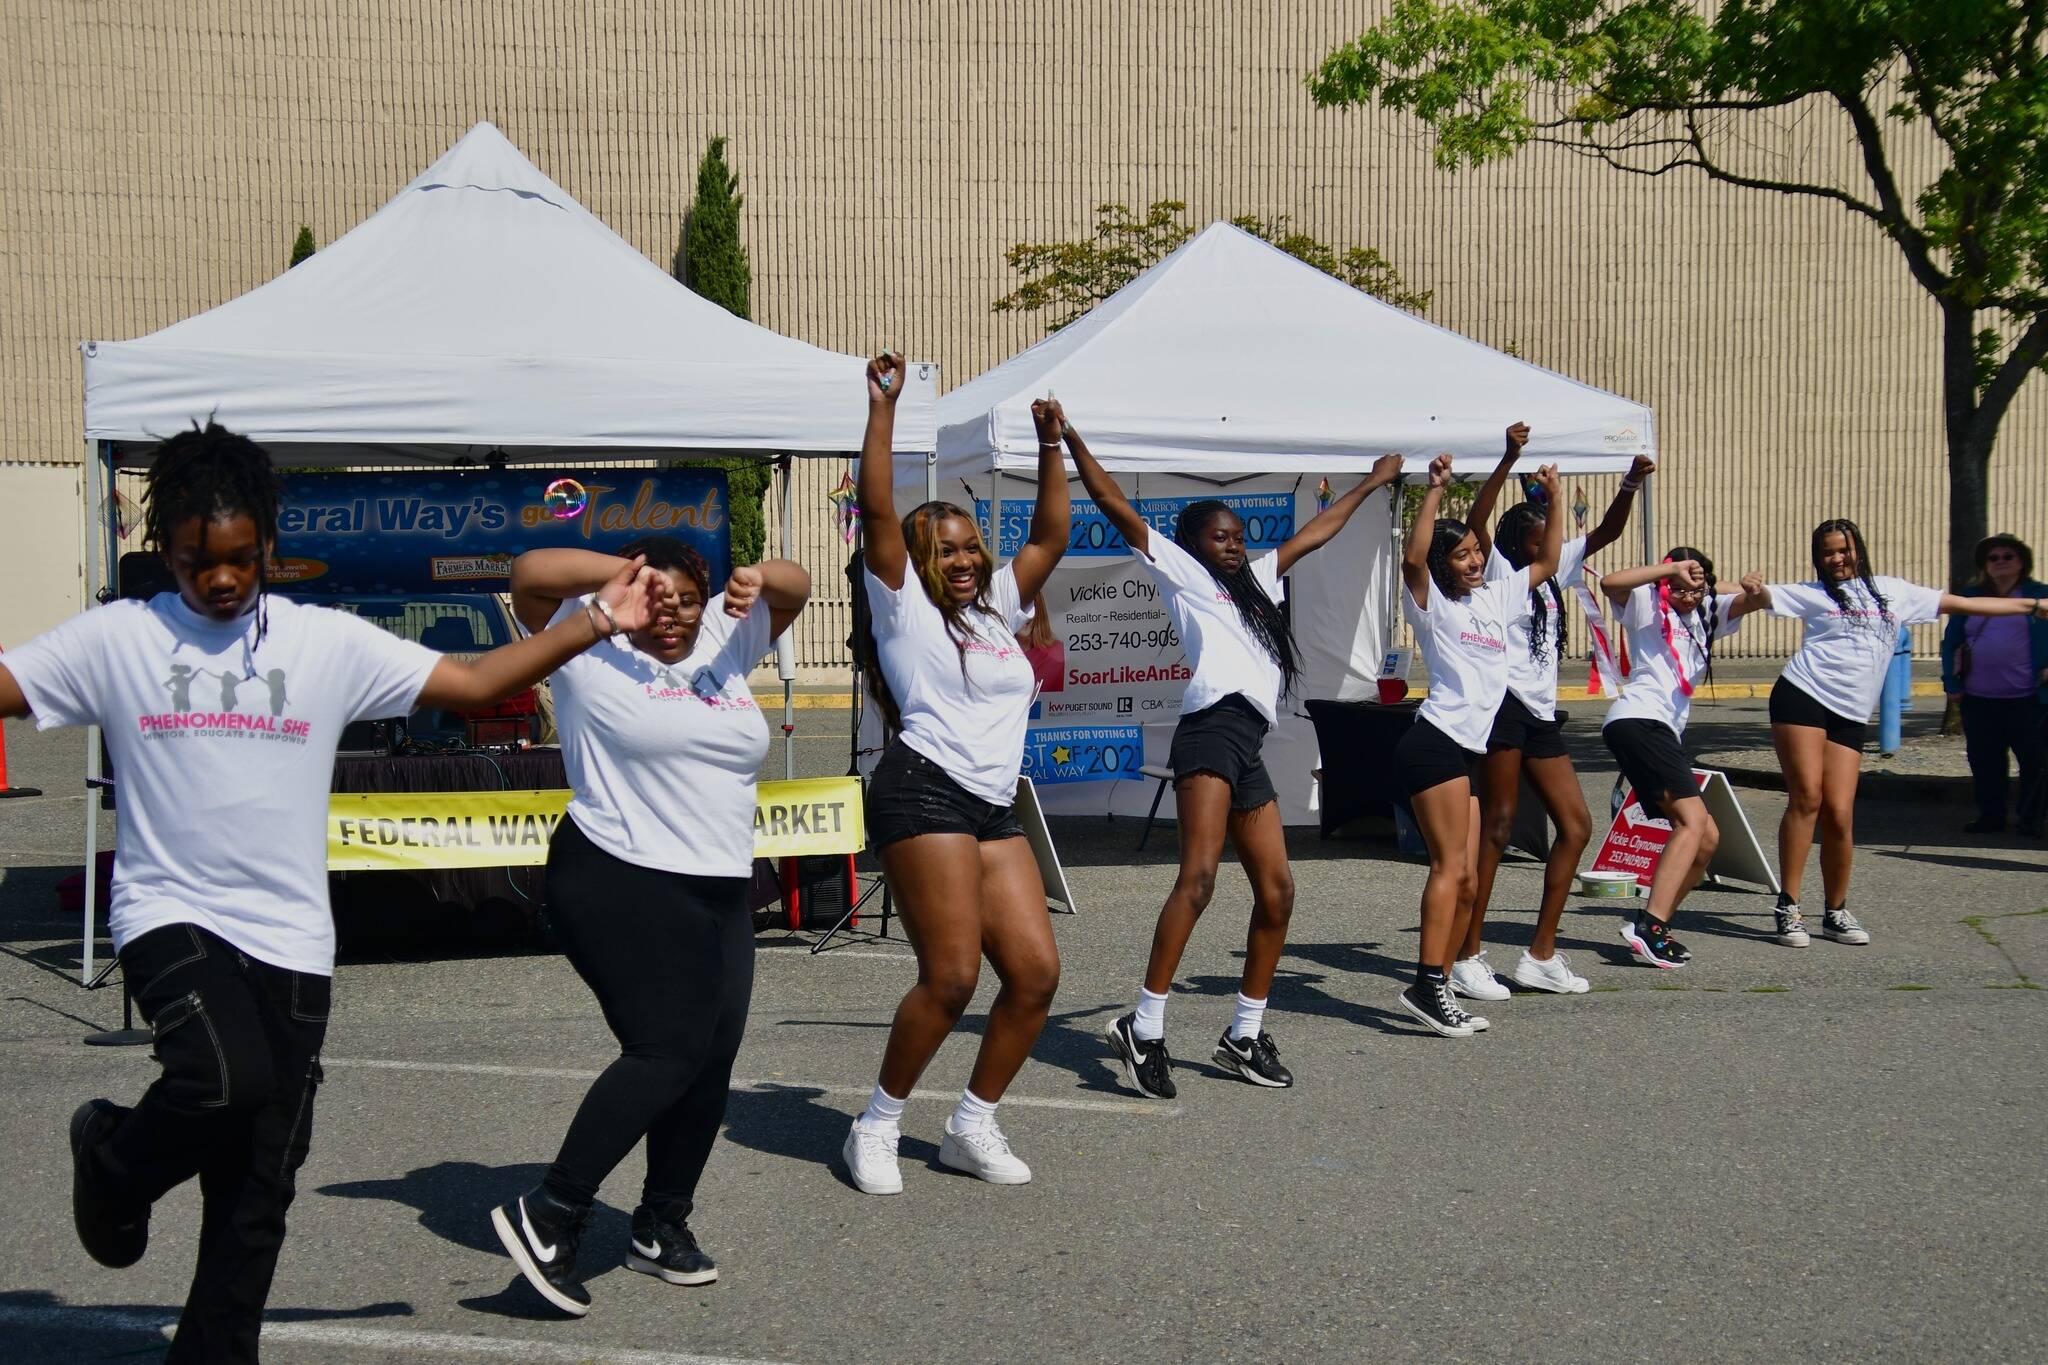 Photo by Bruce Honda
Phenomenal She Dance Group performs Sept. 2 at the Federal Way’s Got Talent competition at the Federal Way Farmers Market. The market runs 9 a.m. to 3 p.m. Saturdays at the Commons mall.